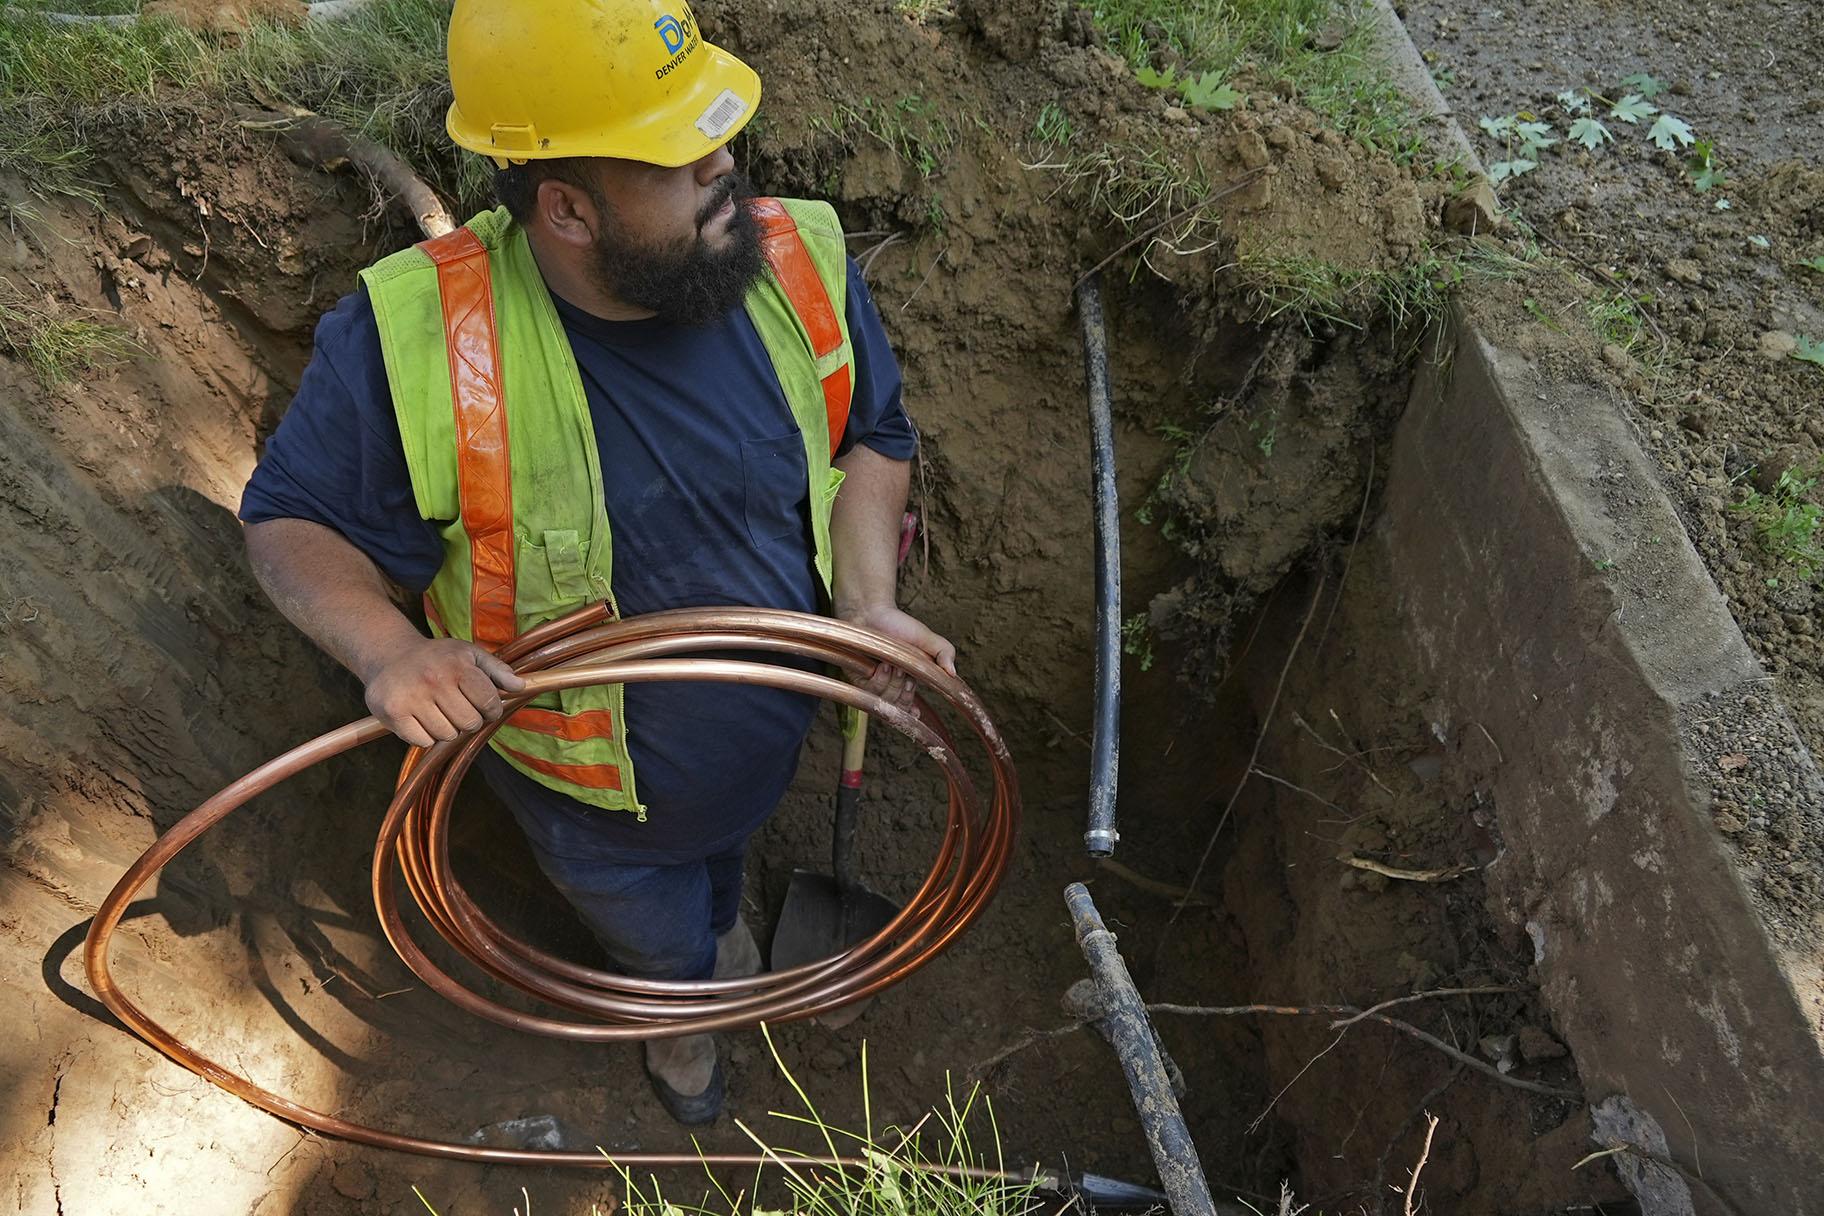 A worker with Denver Water prepares to pass a new copper water service line from a residential water meter to the water main on Thursday, June 17, 2021, in Denver. (AP Photo / Brittany Peterson)